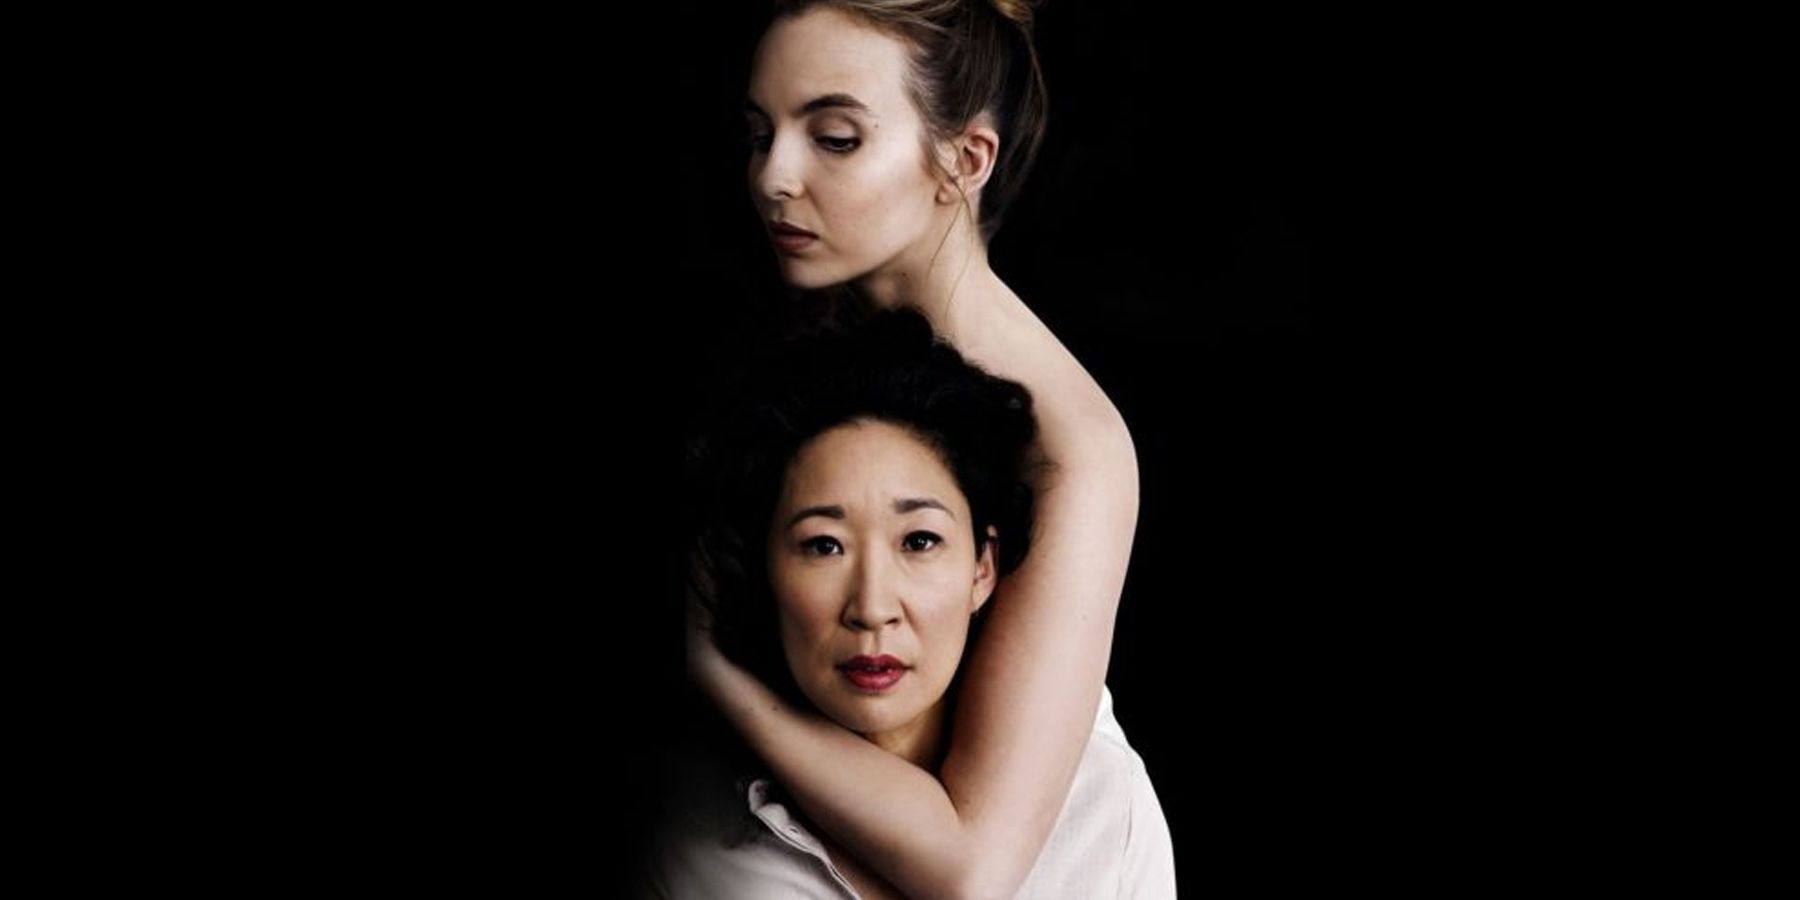 Killing Eve main characters Eve and Villanelle